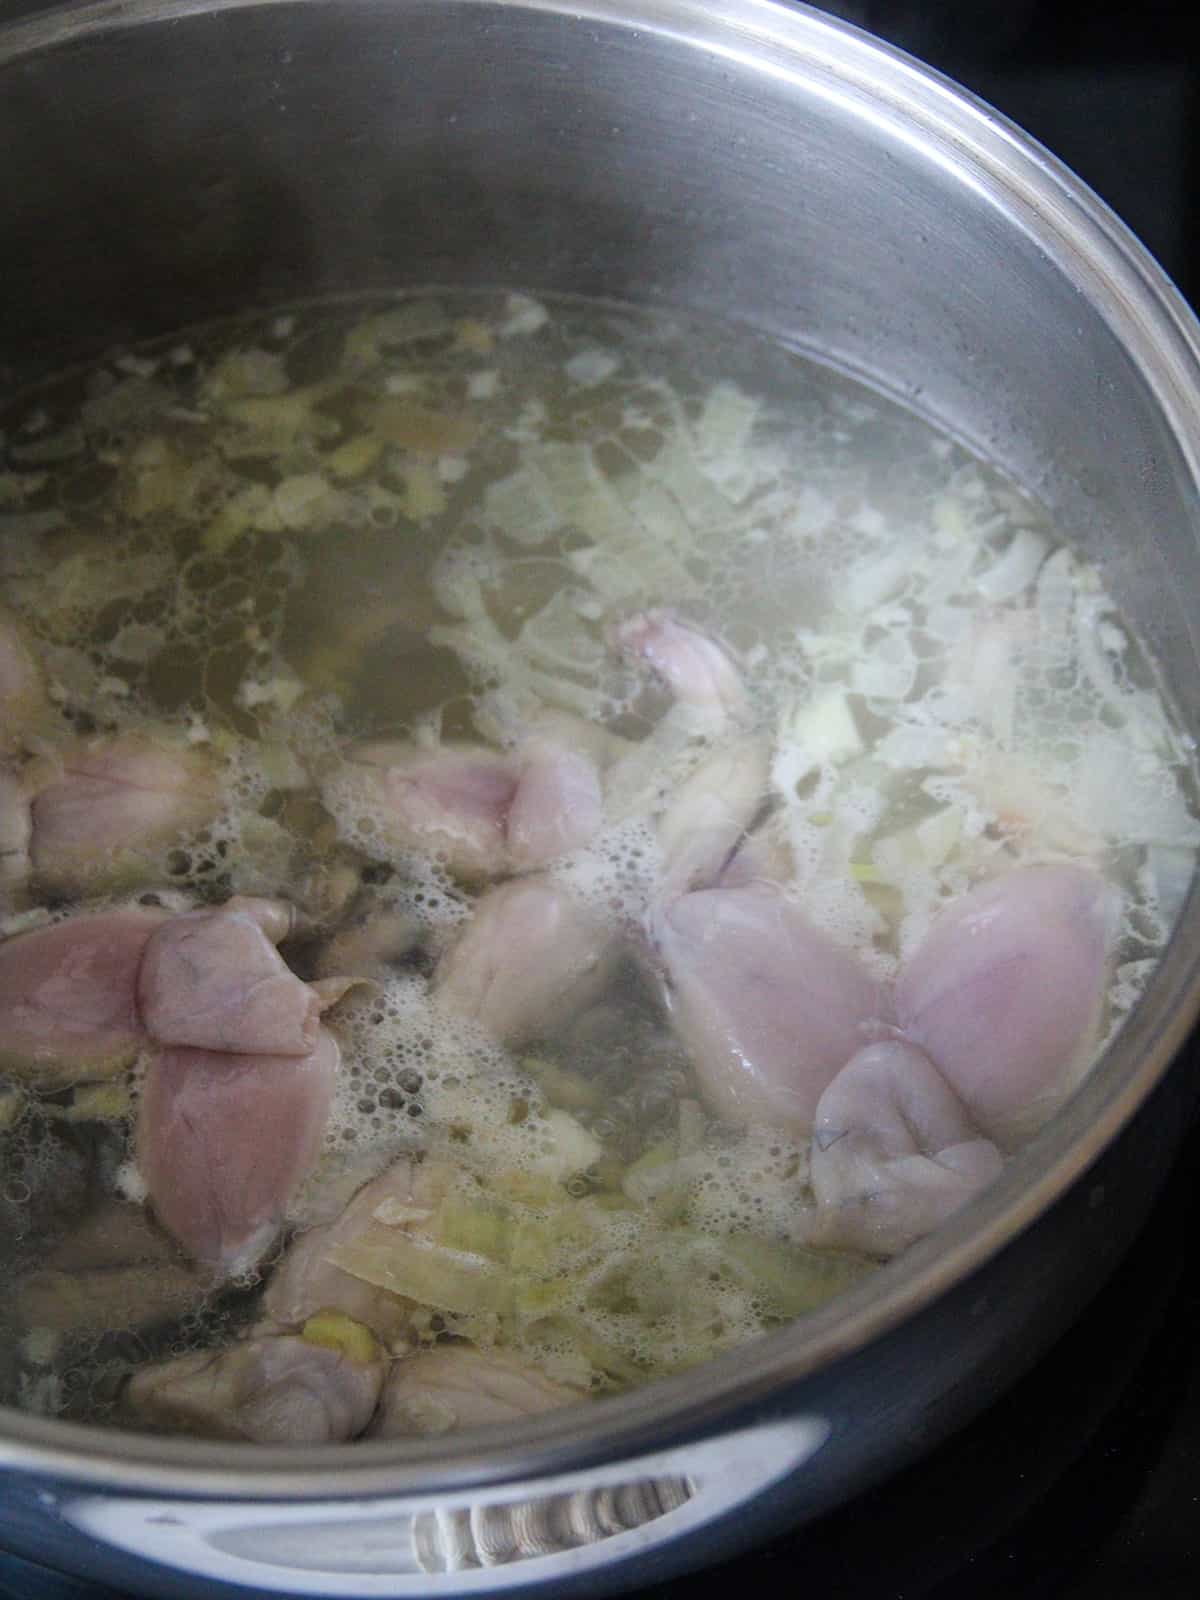 sauteing frog legs in garlic and onions in a pan.